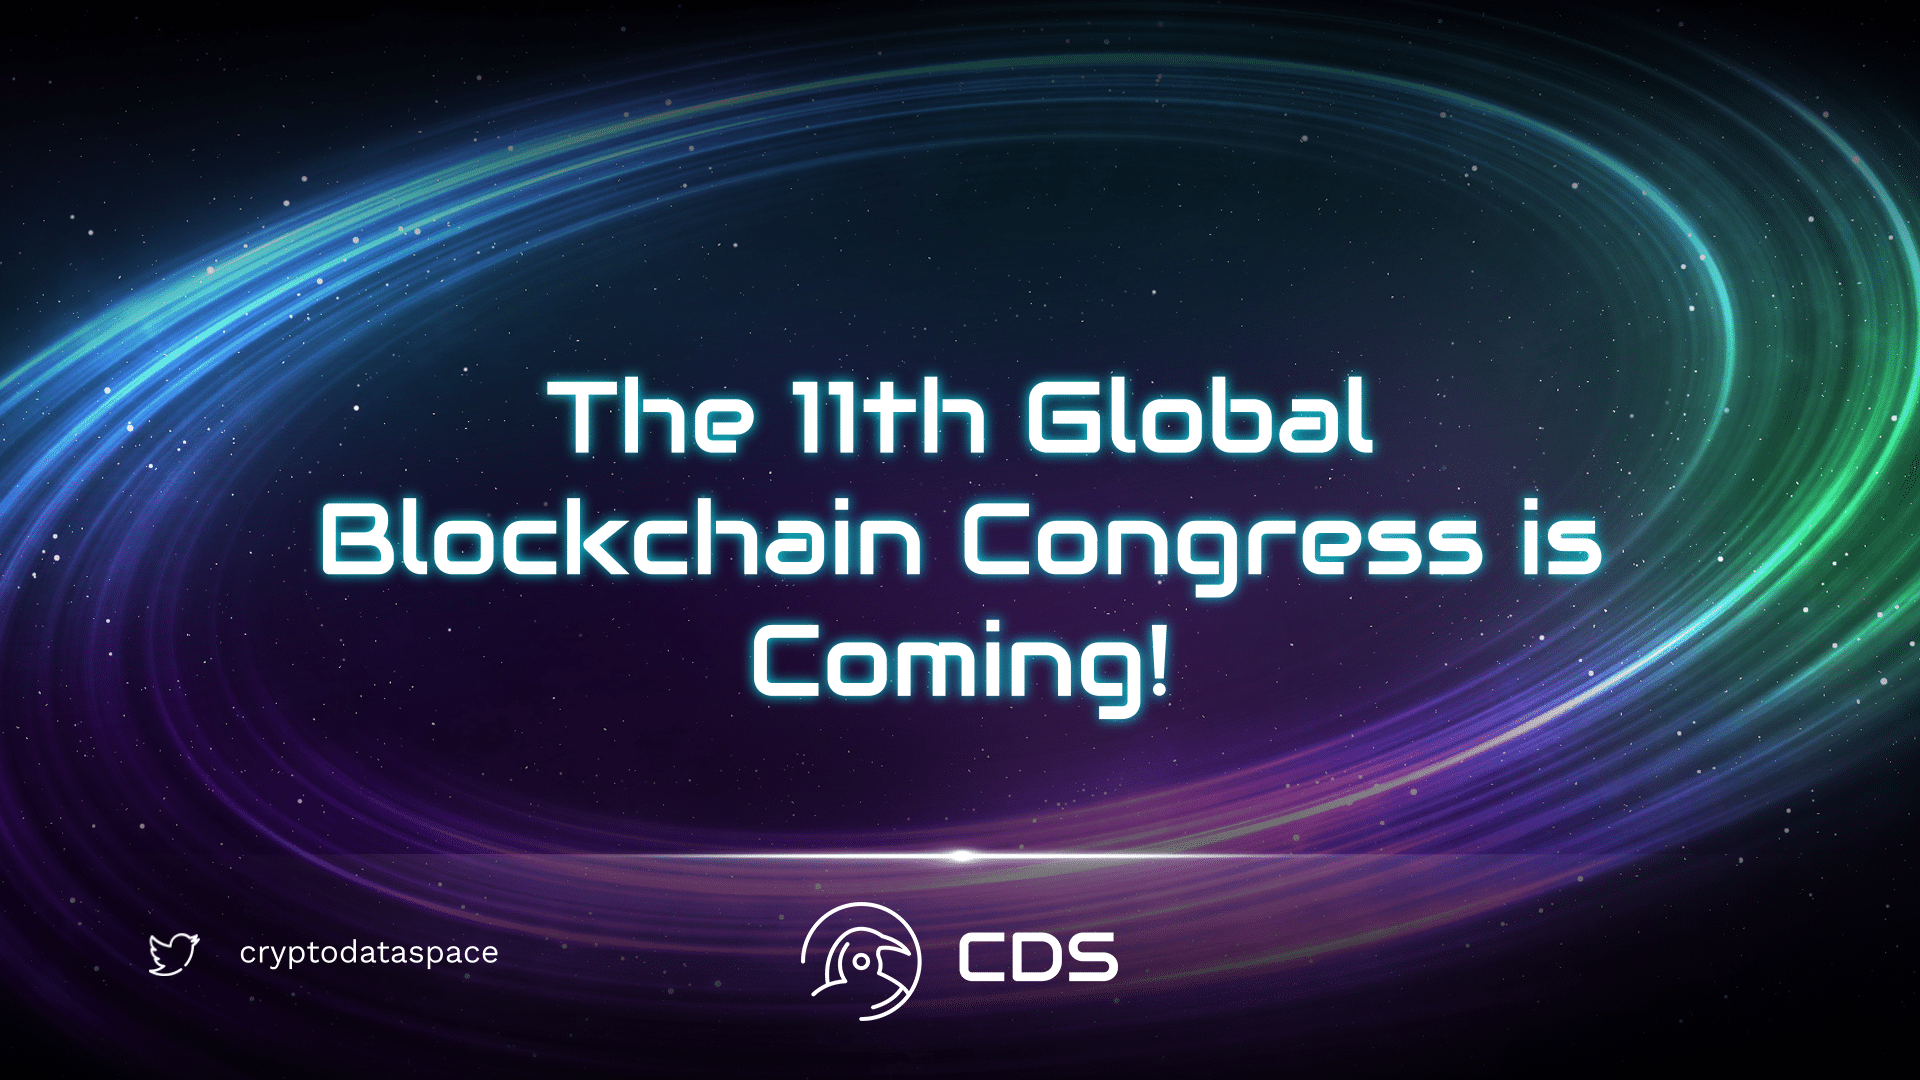 The 11th Global Blockchain Congress is Coming!